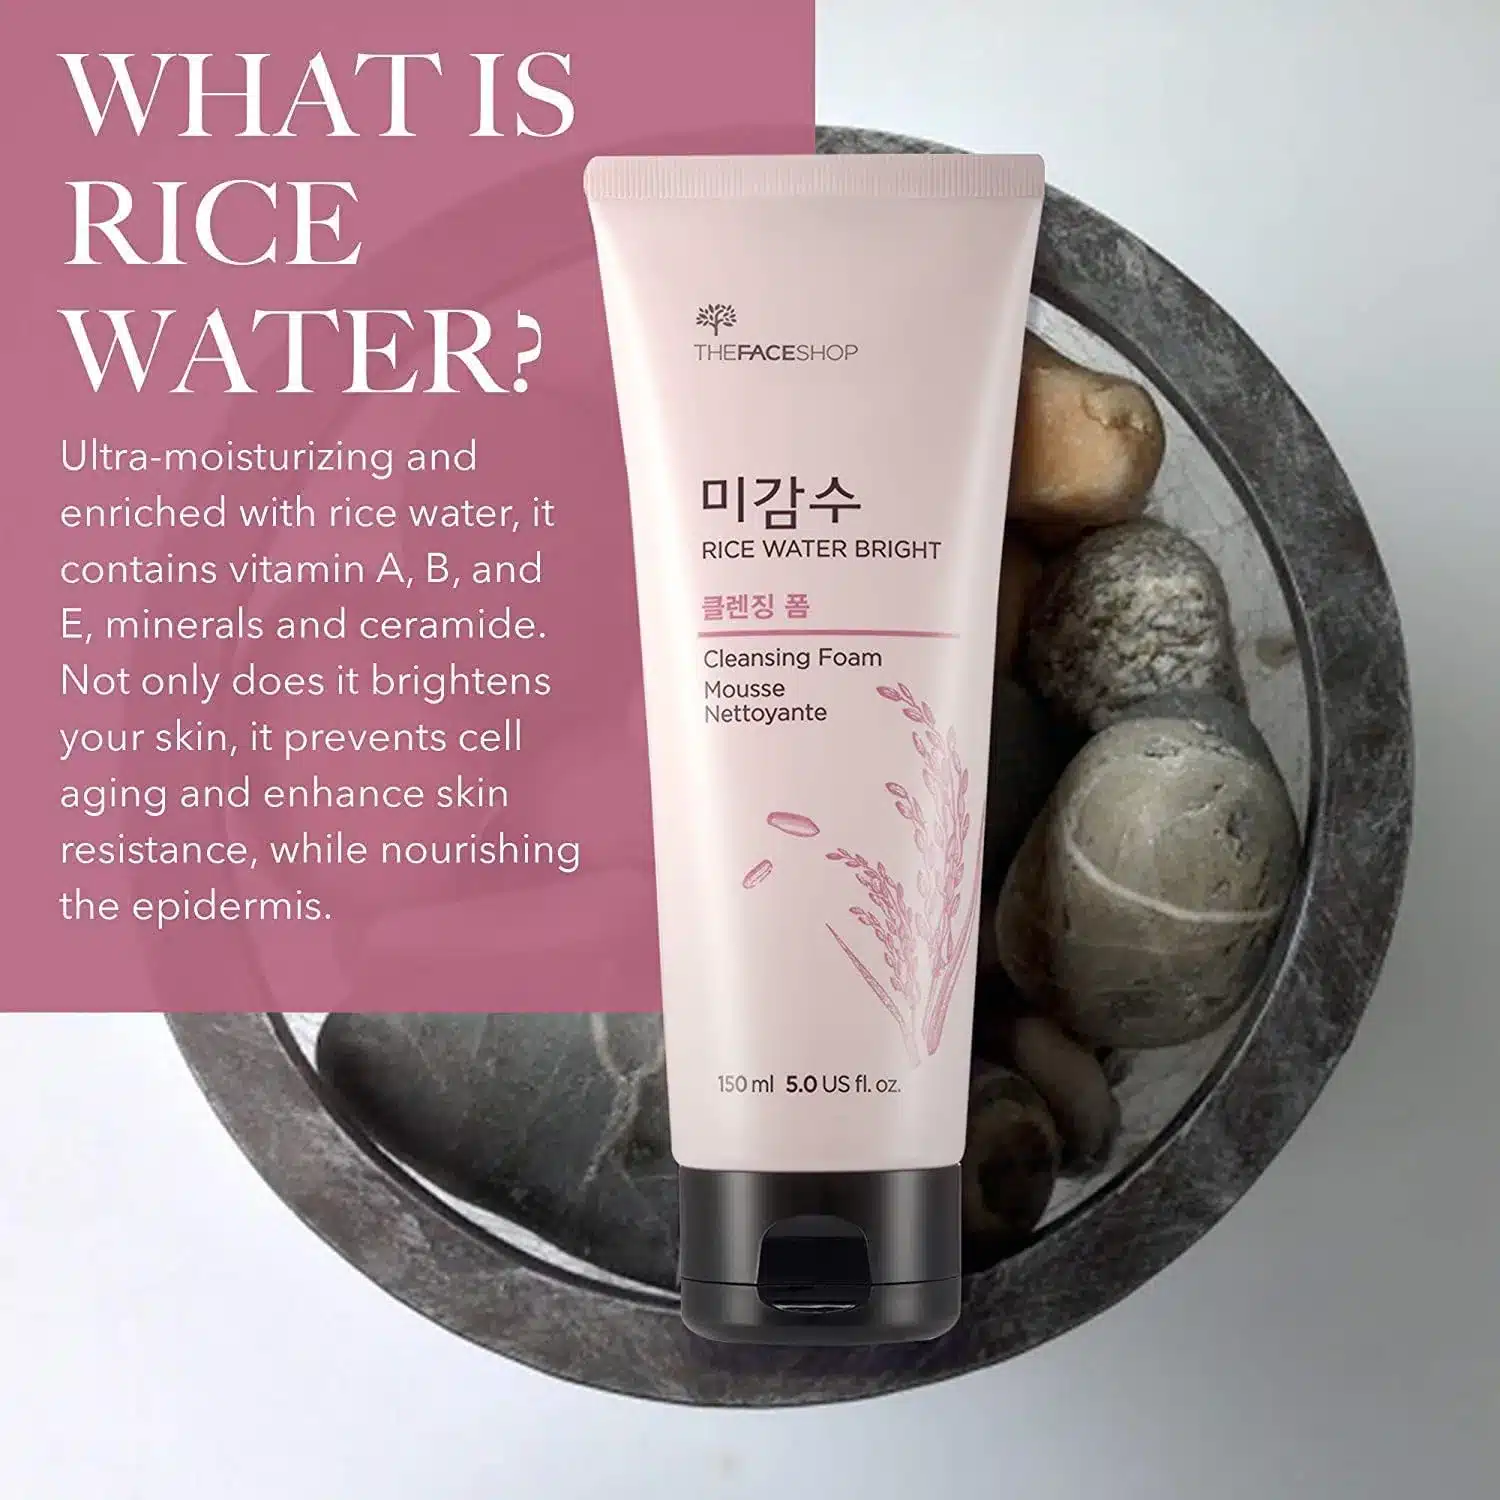 The-Face-Shop-Rice-water-Bright-Cleansing-foam-150ml-with-Rice-Water-for-Brighten-the-Skin-Korea-4.webp